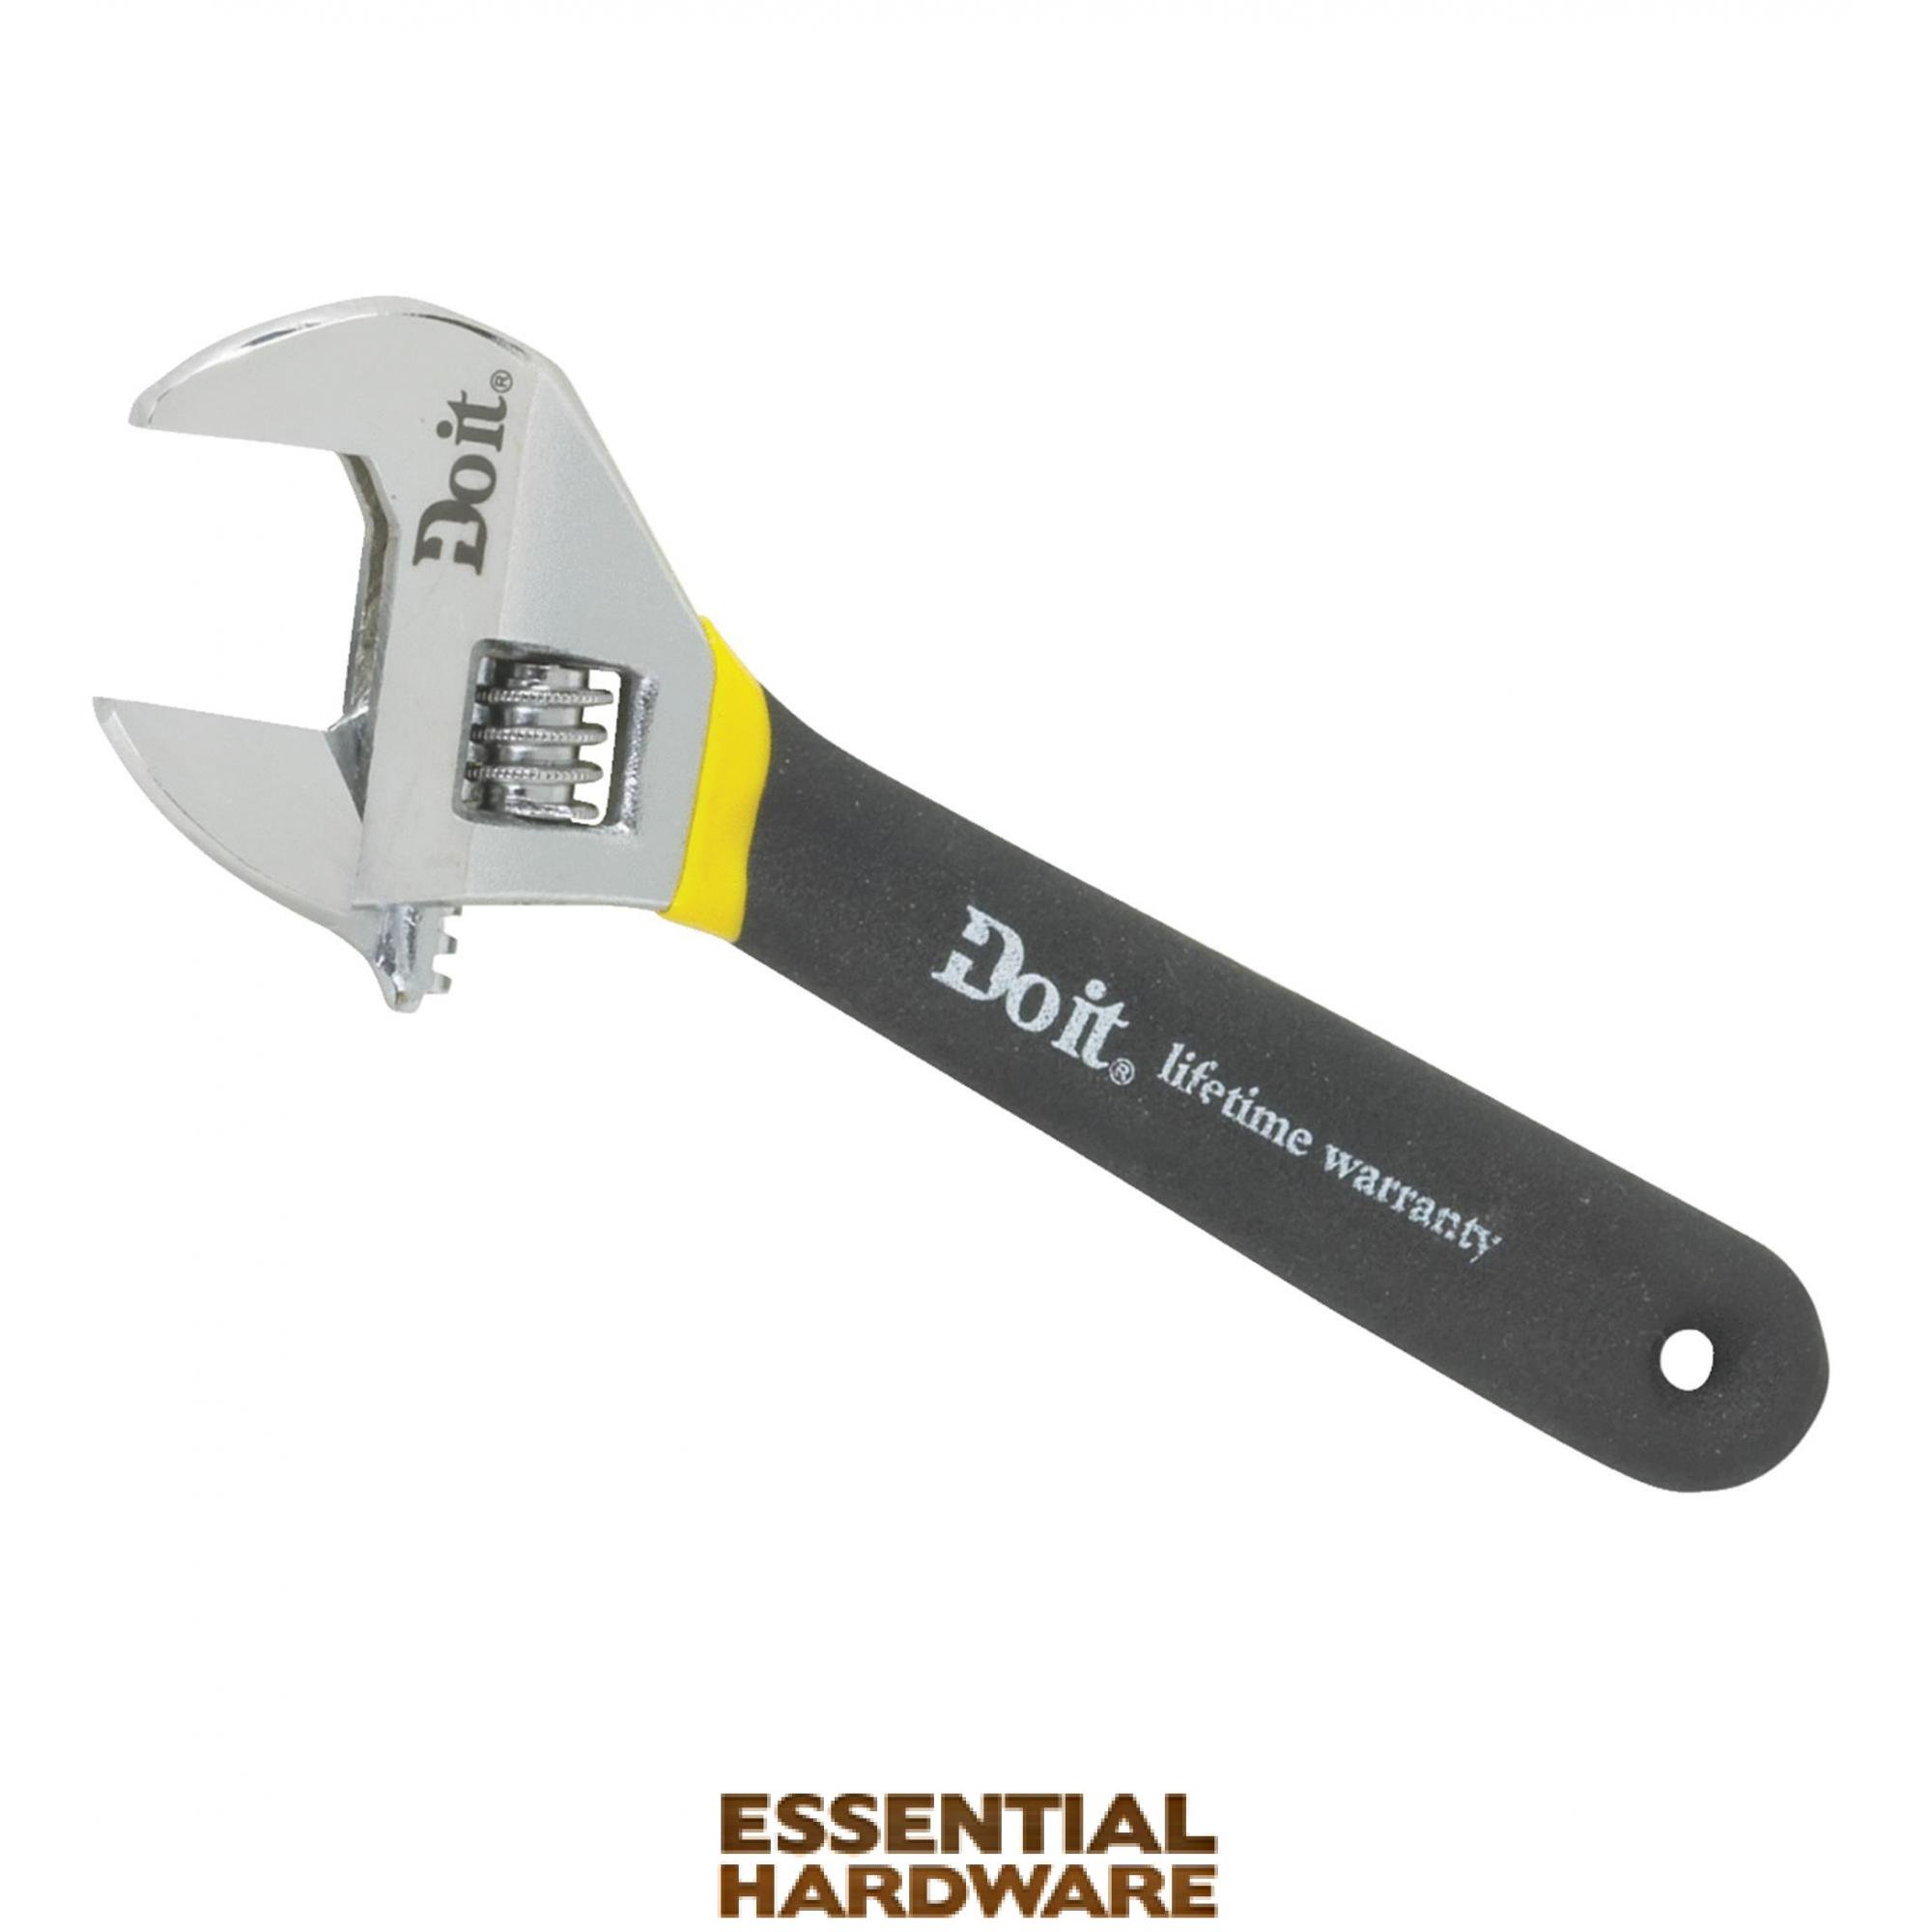 Do It Adjustable Wrench | Essential Hardware